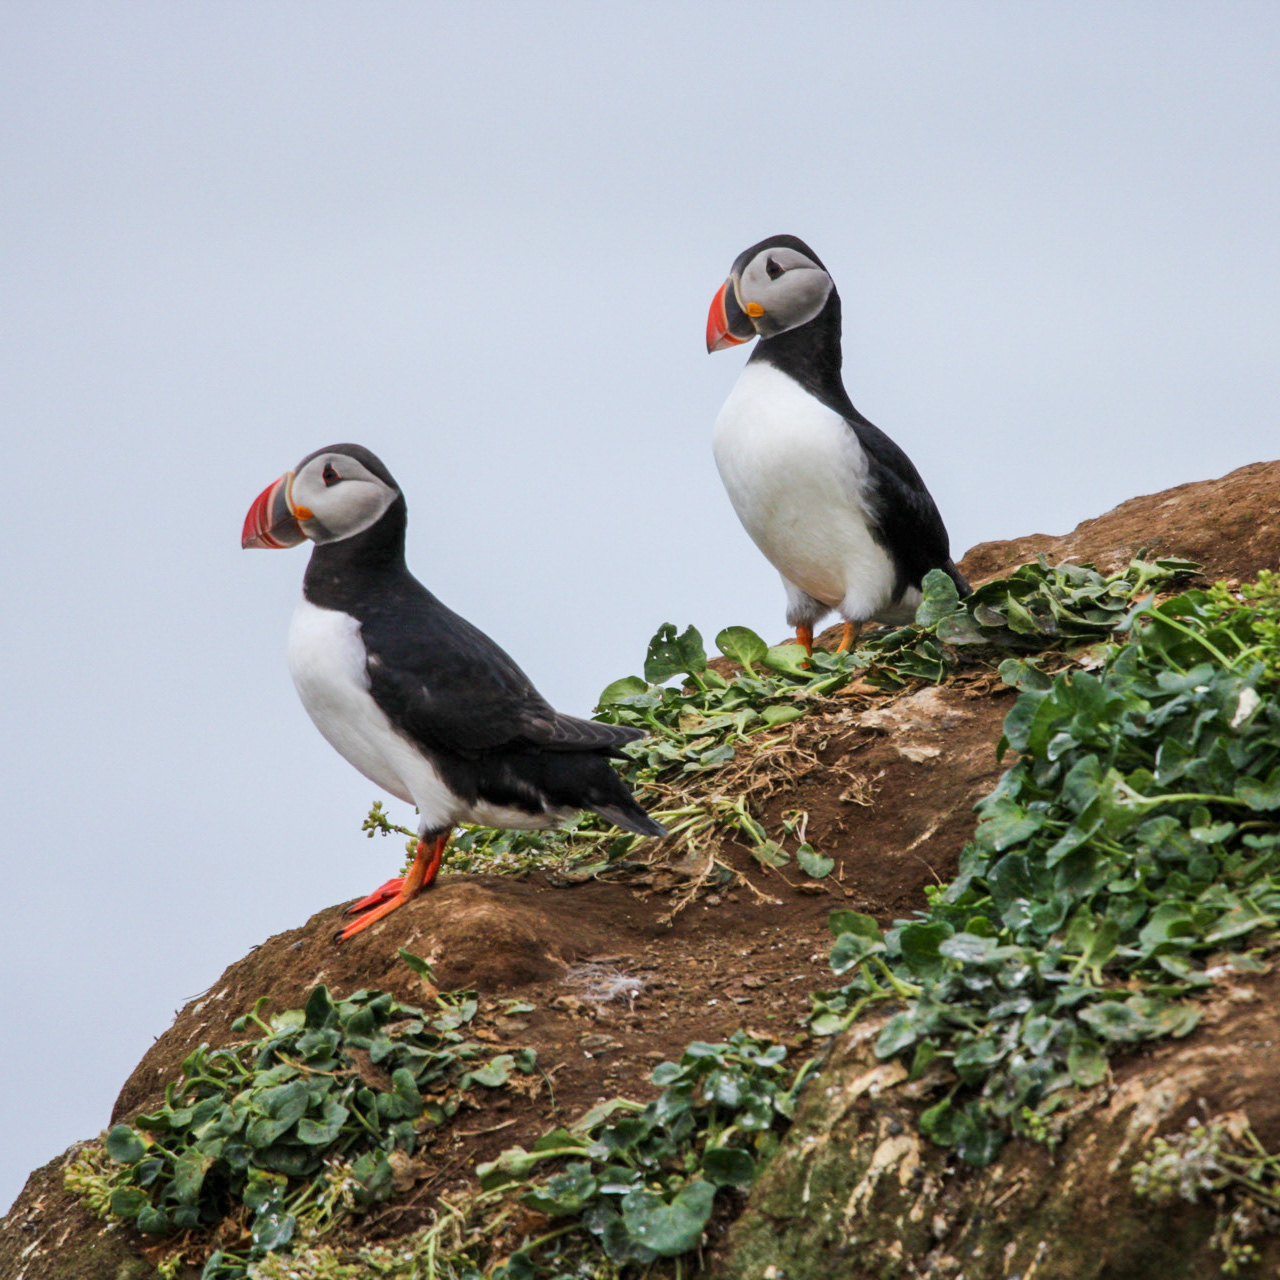 Two icelandic puffins walking together down a hill